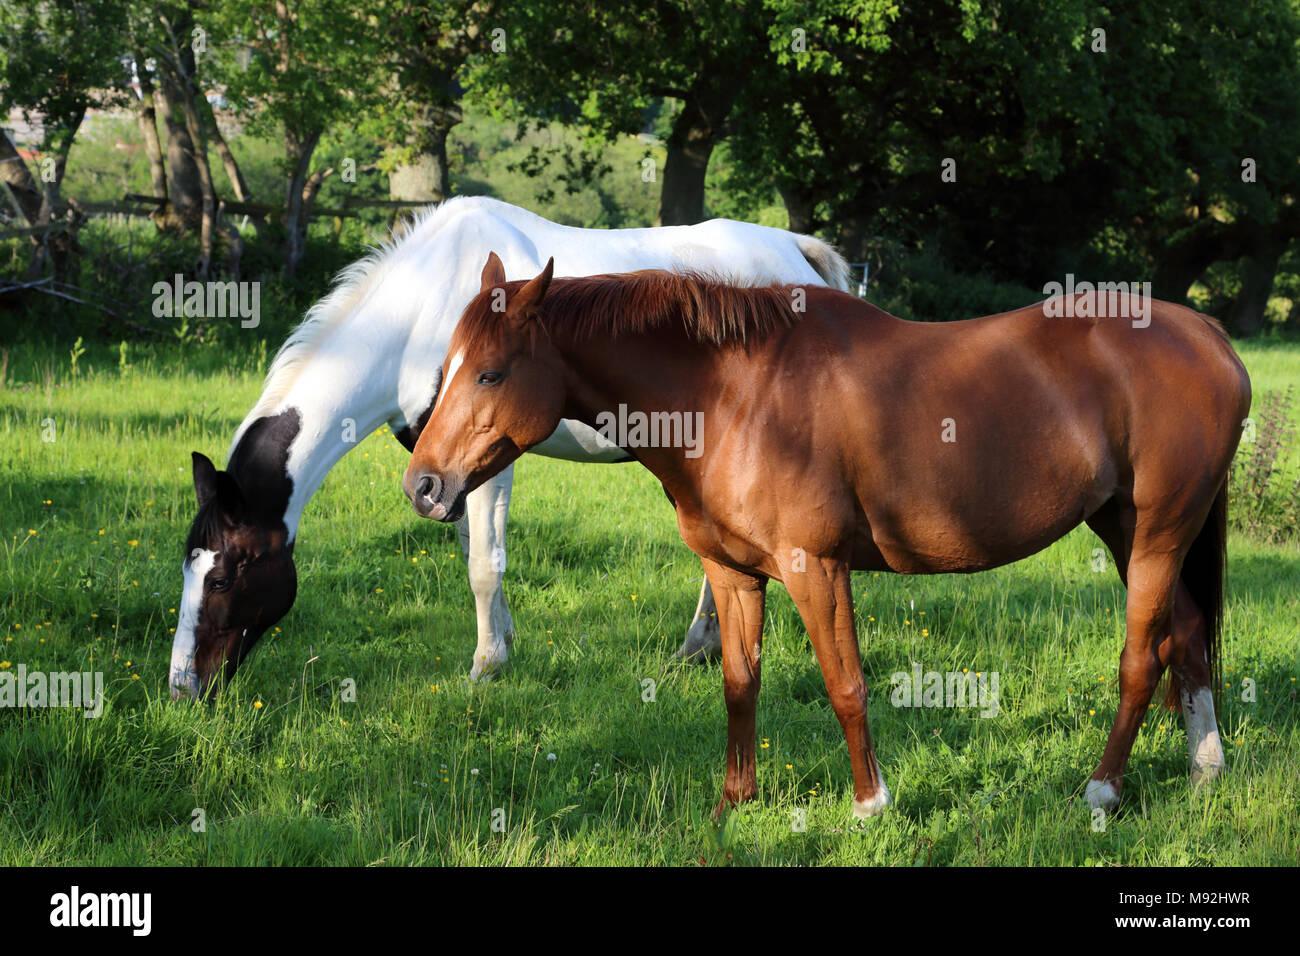 Chestnut and skewbald horses in a field in Devon, England, UK. Stock Photo